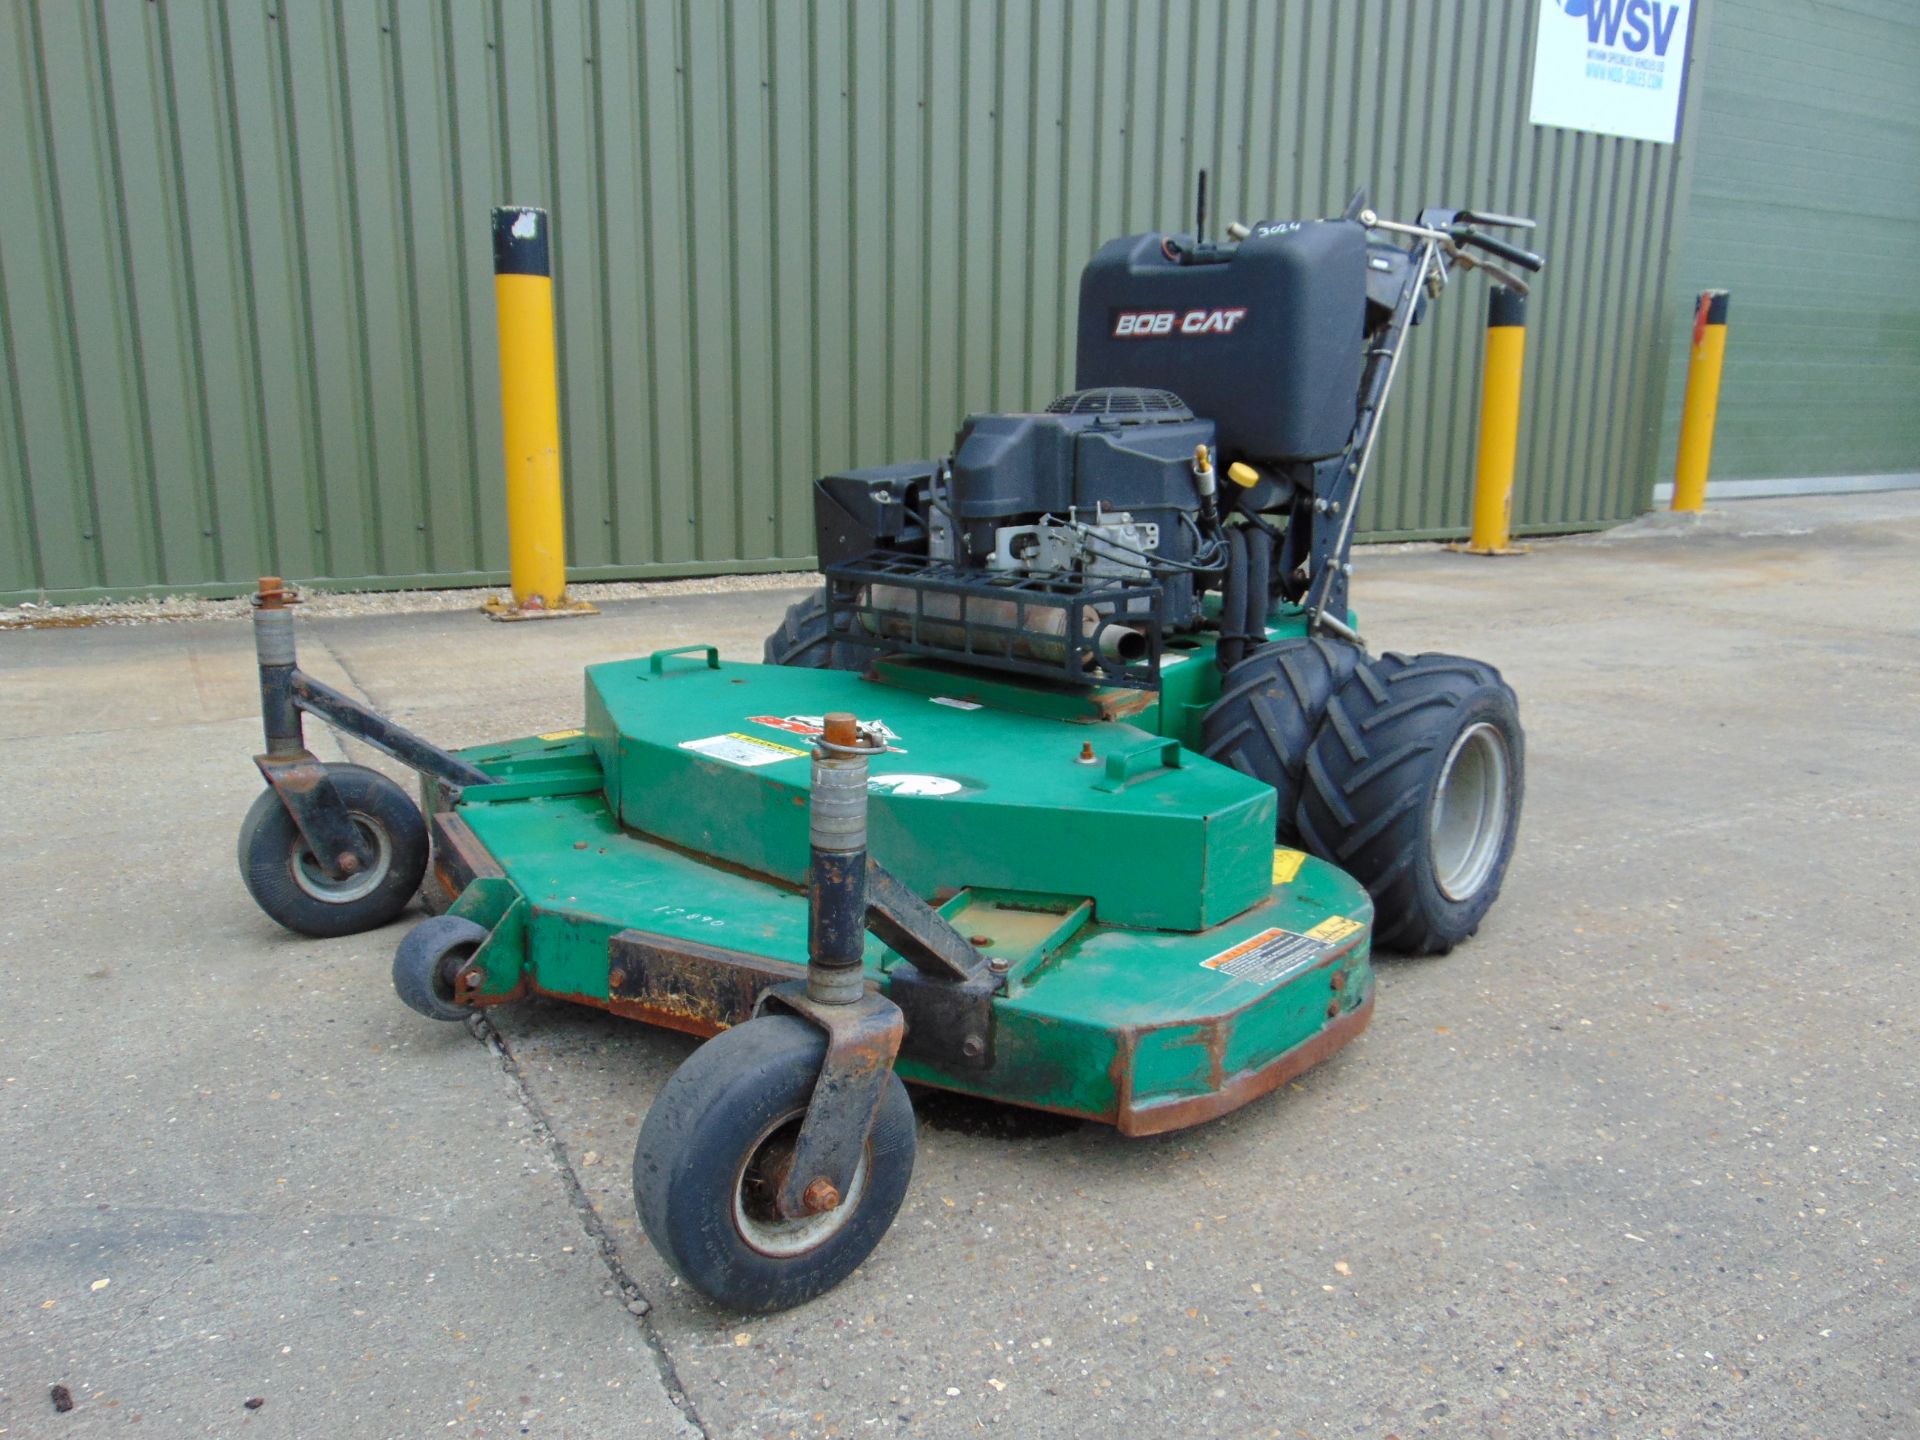 2015 Ransomes Bobcat 52" Zero Turn Lawn Mower Only 1,070 Hours!